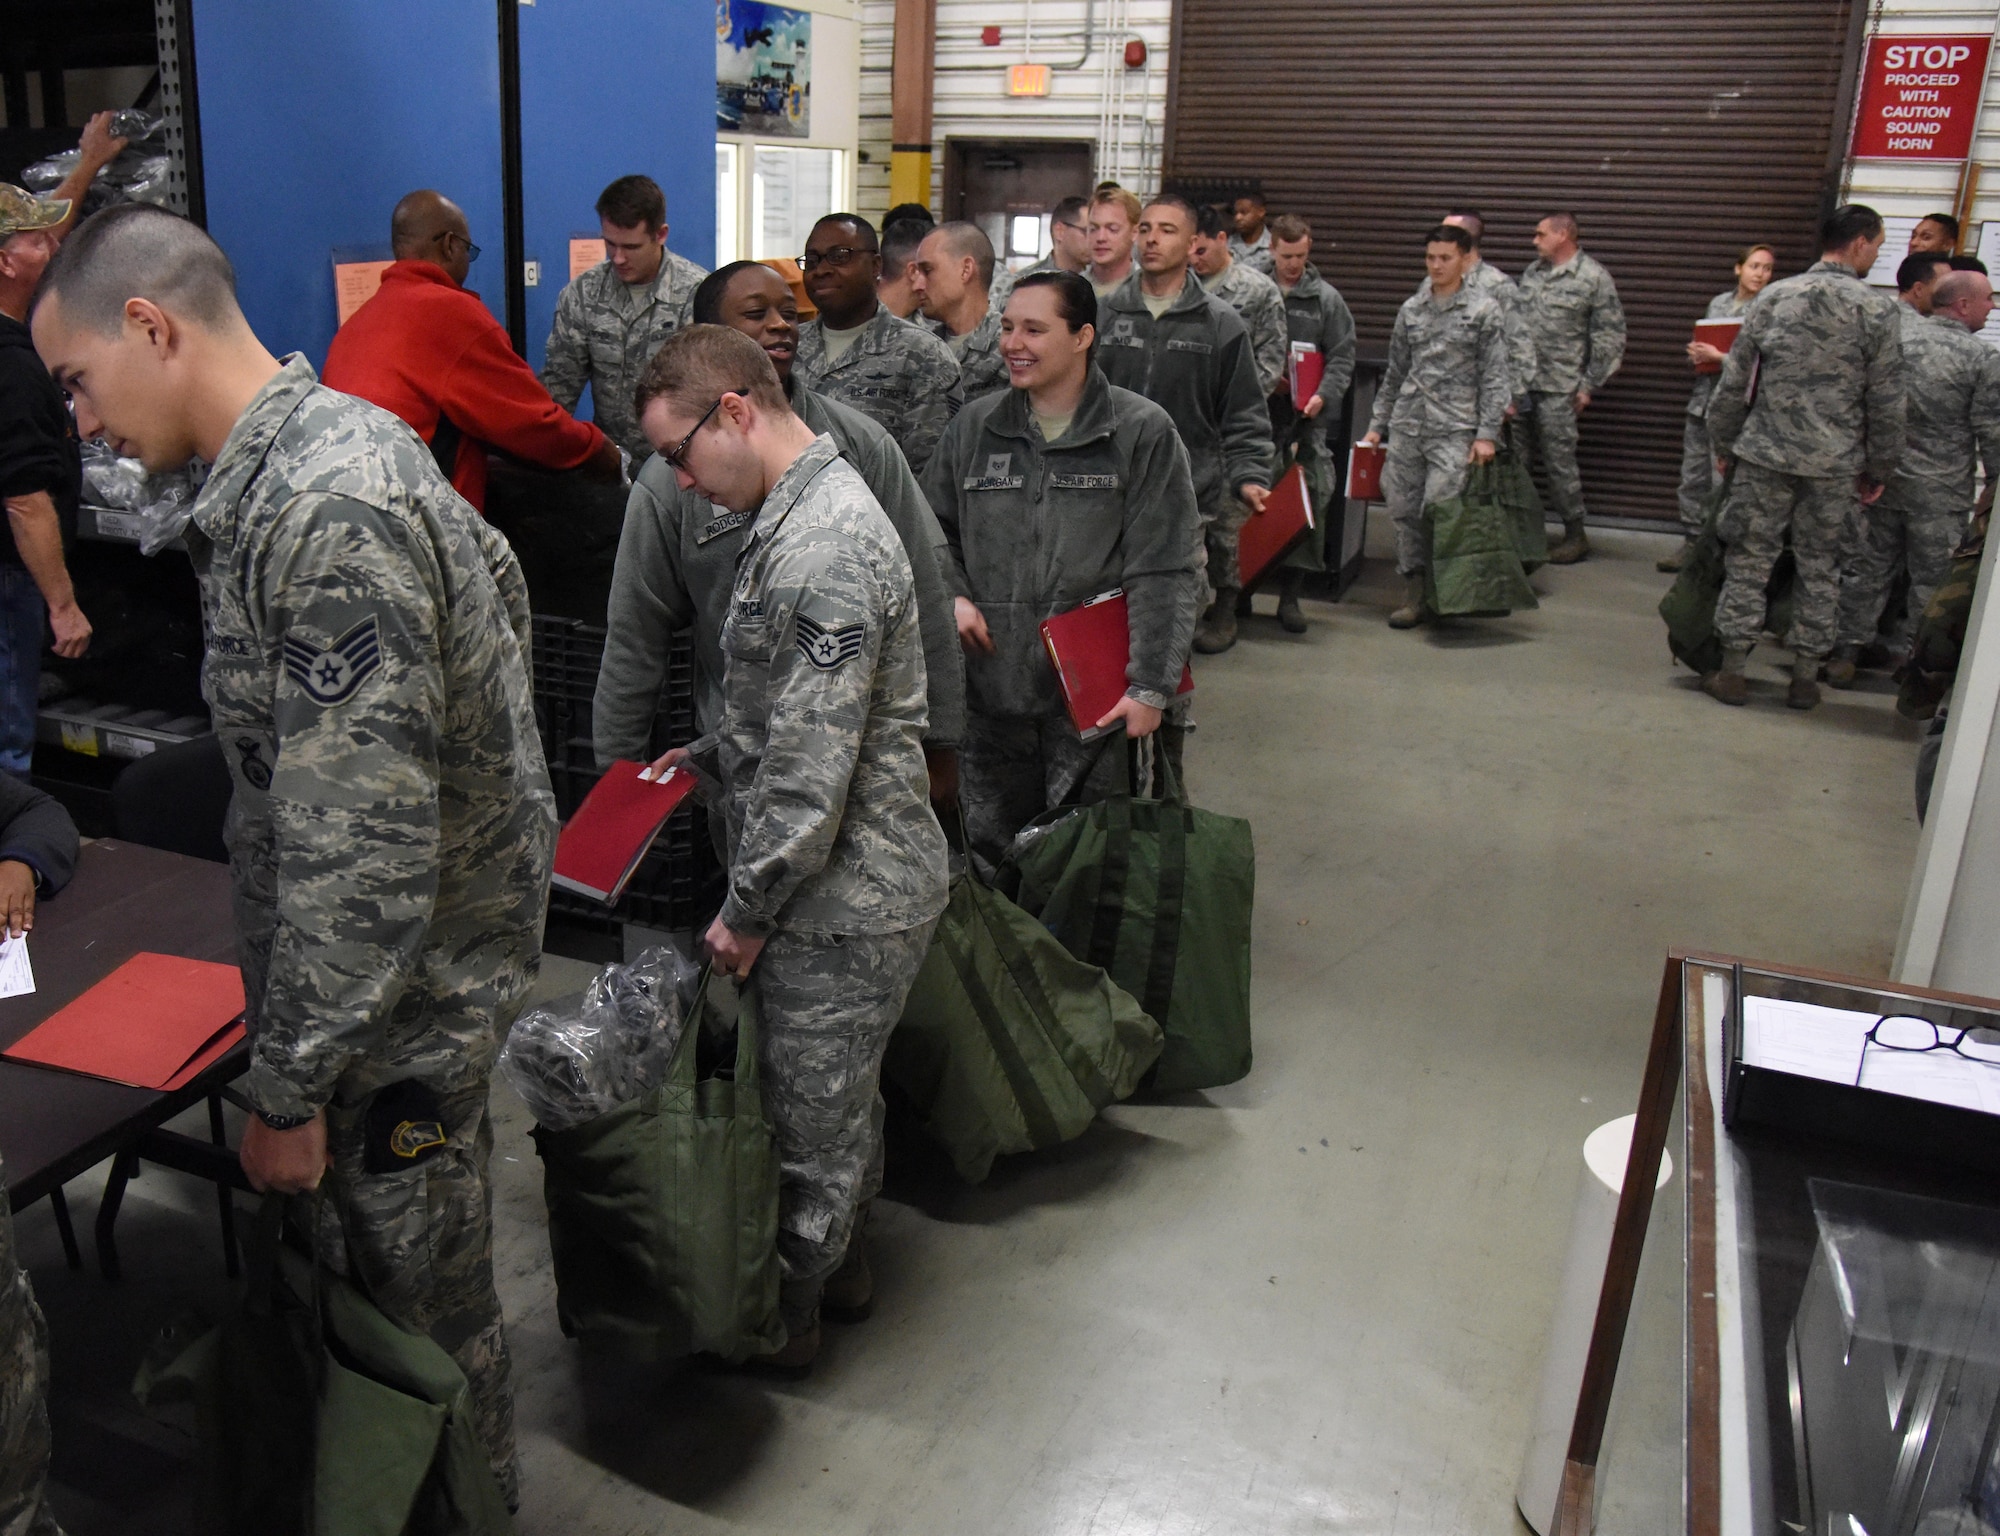 Keesler personnel receive mobility bag items at the supply warehouse during a deployment exercise Dec. 8, 2016, on Keesler Air Force Base, Miss. The exercise scenario tested the mission readiness of Team Keesler for simultaneous world-wide deployments. (U.S. Air Force photo by Kemberly Groue)